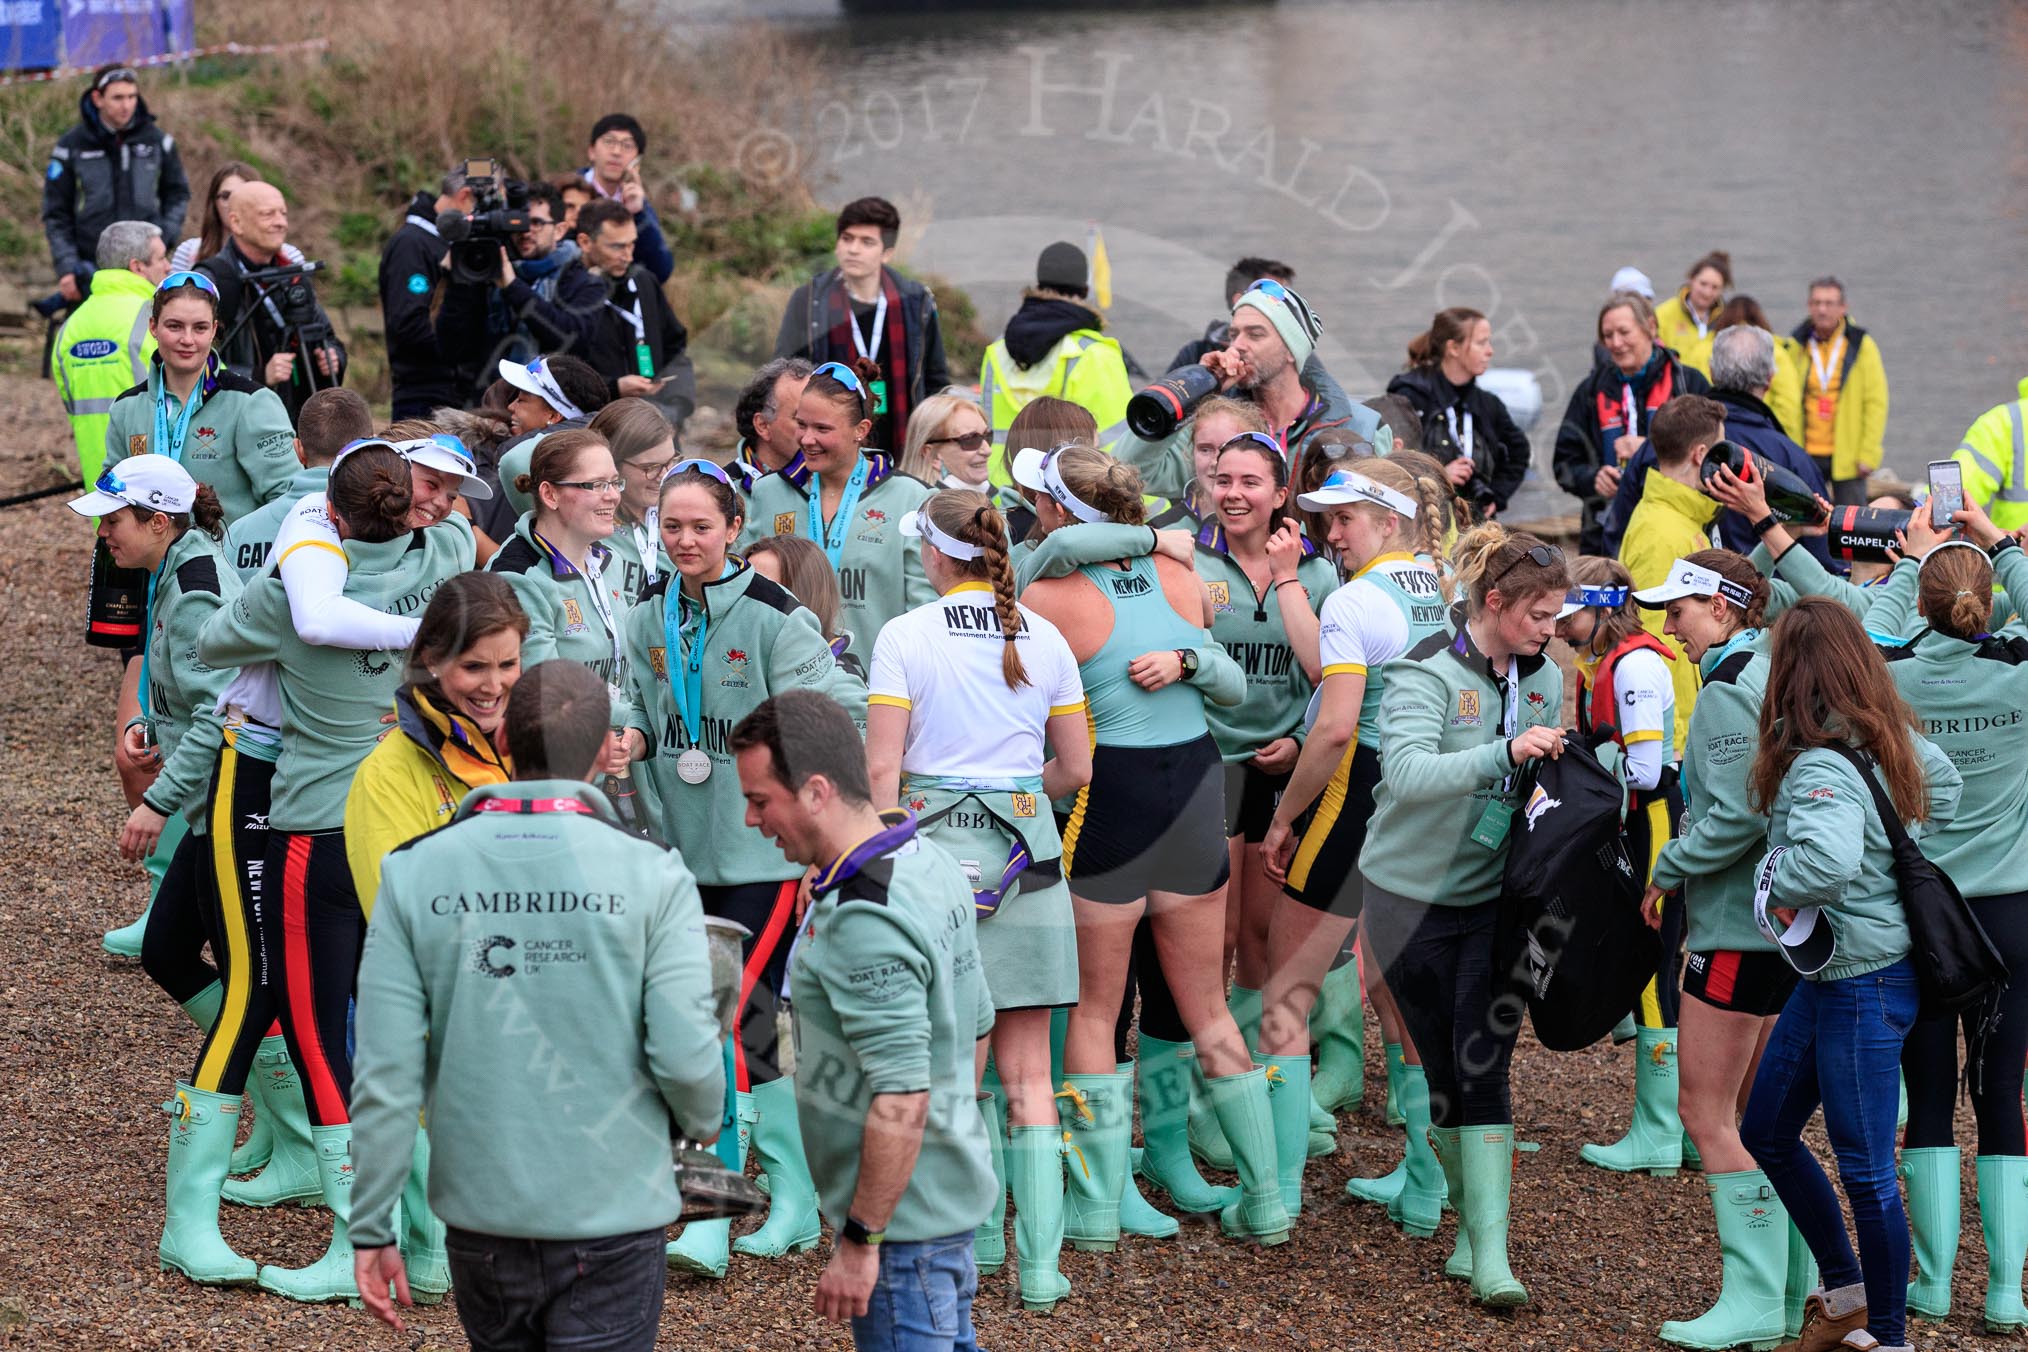 The Cancer Research UK Women's Boat Race 2018: The Cambridge women celebrating after both the Blue Boat and the reserve boat, Blondie, have beaten the Oxford boats.
River Thames between Putney Bridge and Mortlake,
London SW15,

United Kingdom,
on 24 March 2018 at 17:12, image #310